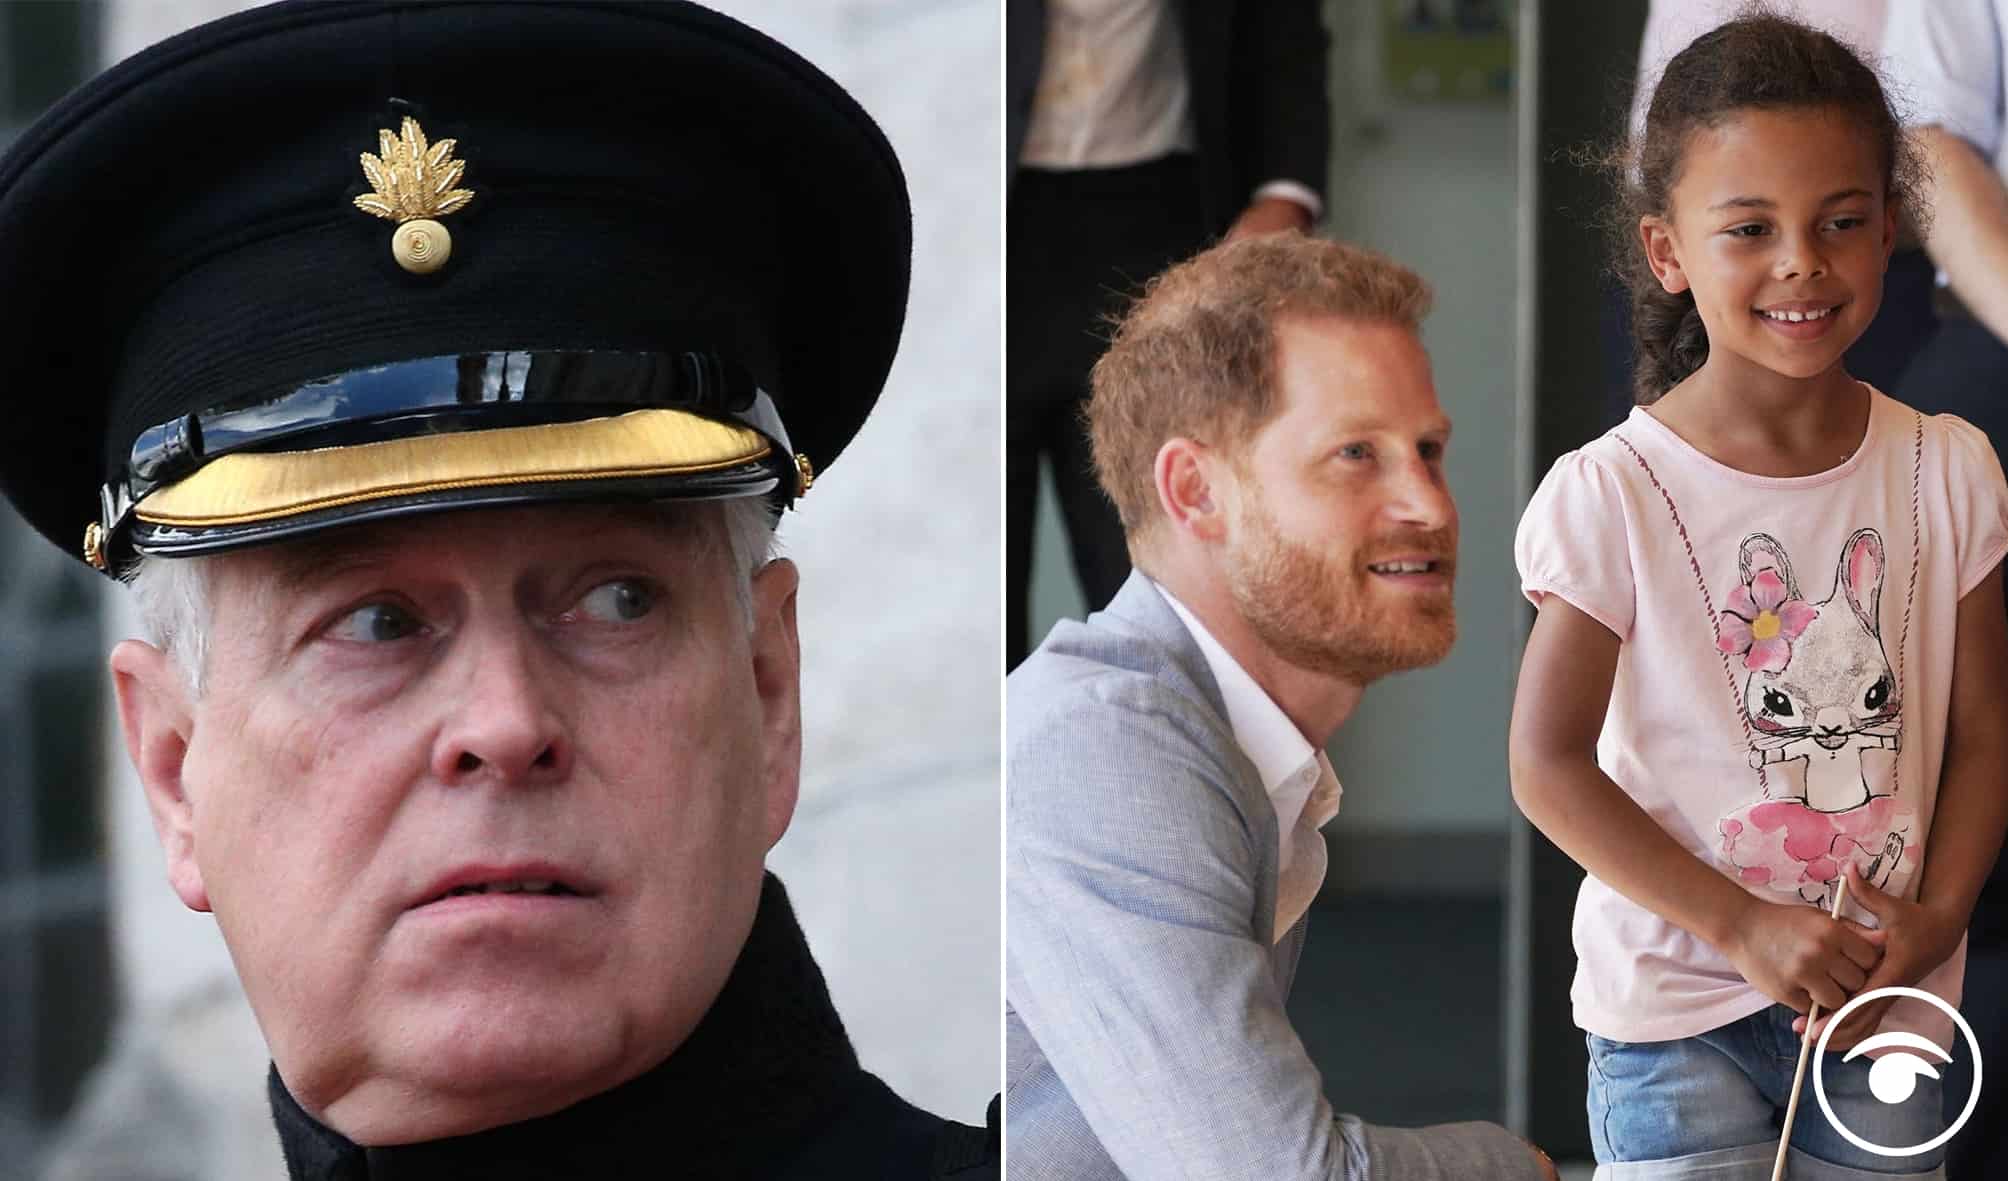 Over 30,000 sign petition ‘inviting’ Prince Harry to give up titles but plan backfires on social media